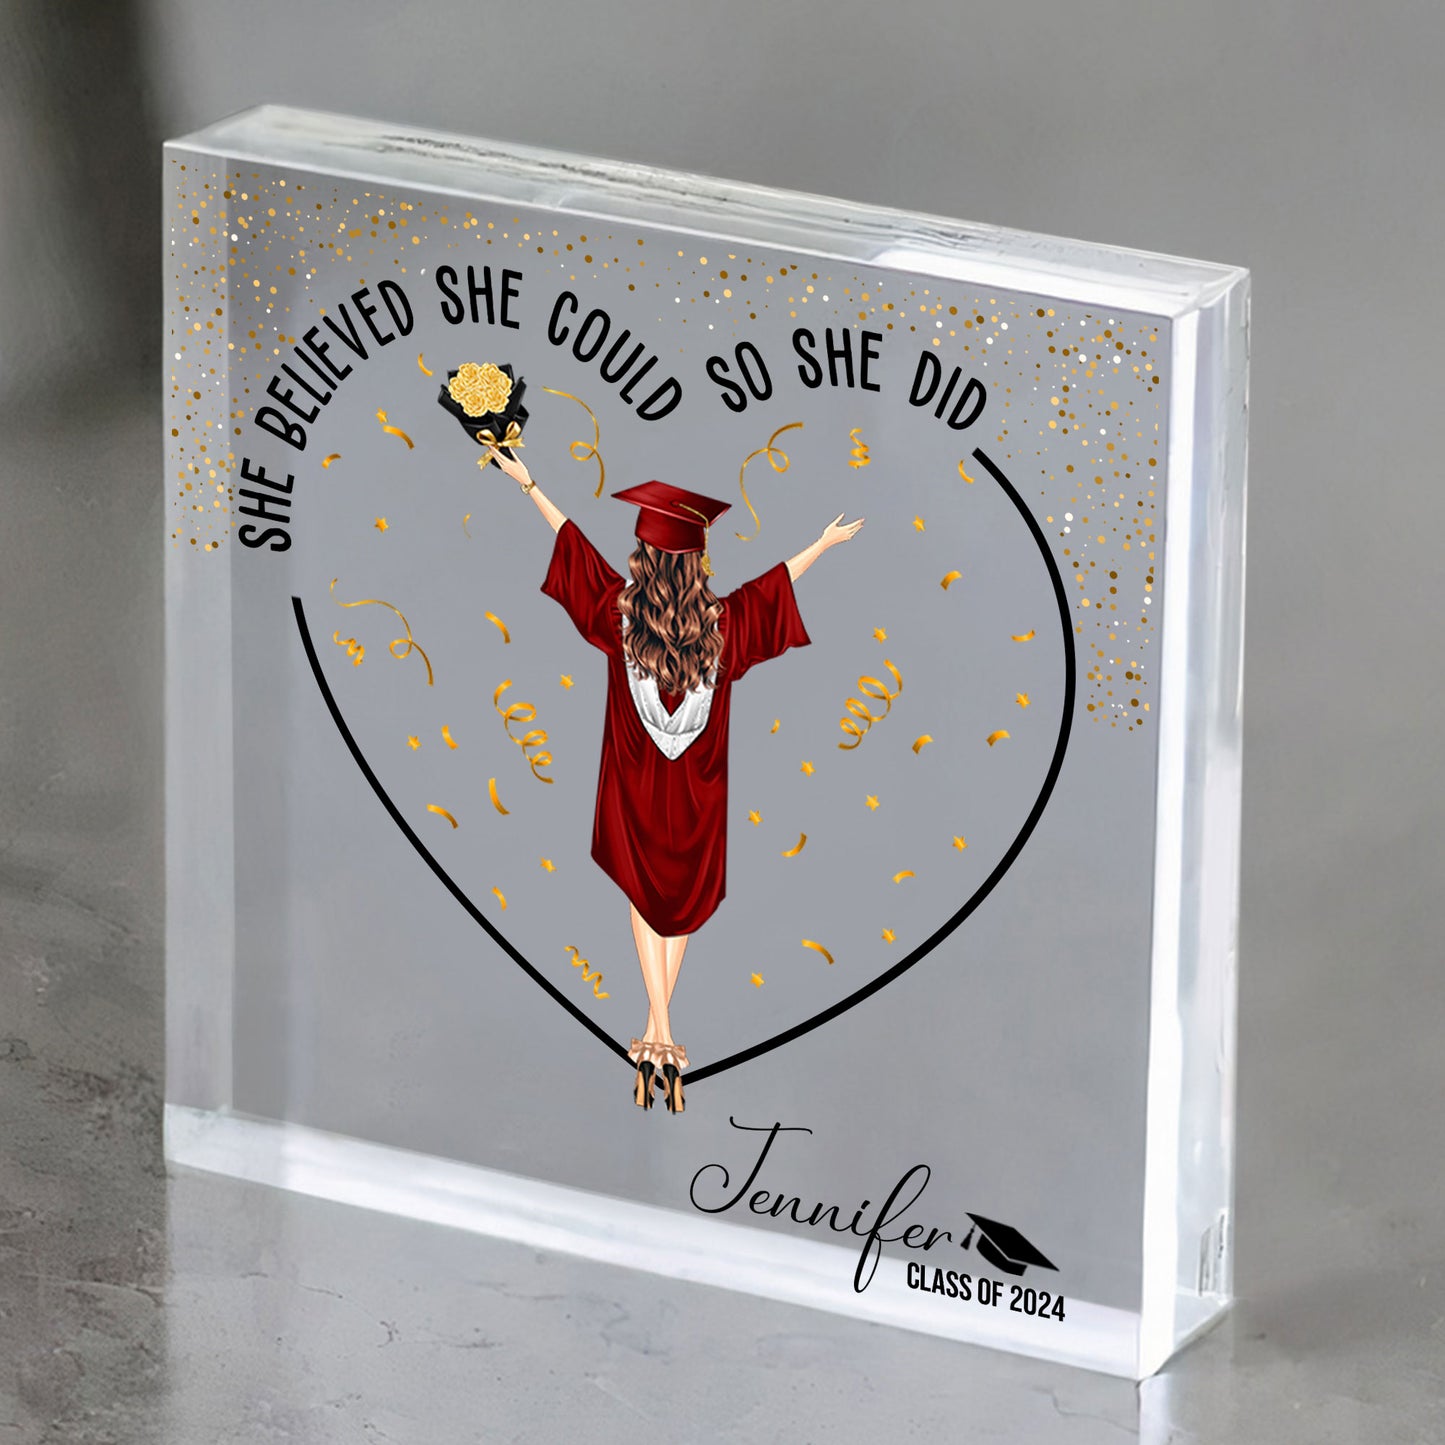 Graduation Gifts She Believed She Could So She Did - Personalized Acrylic Plaque